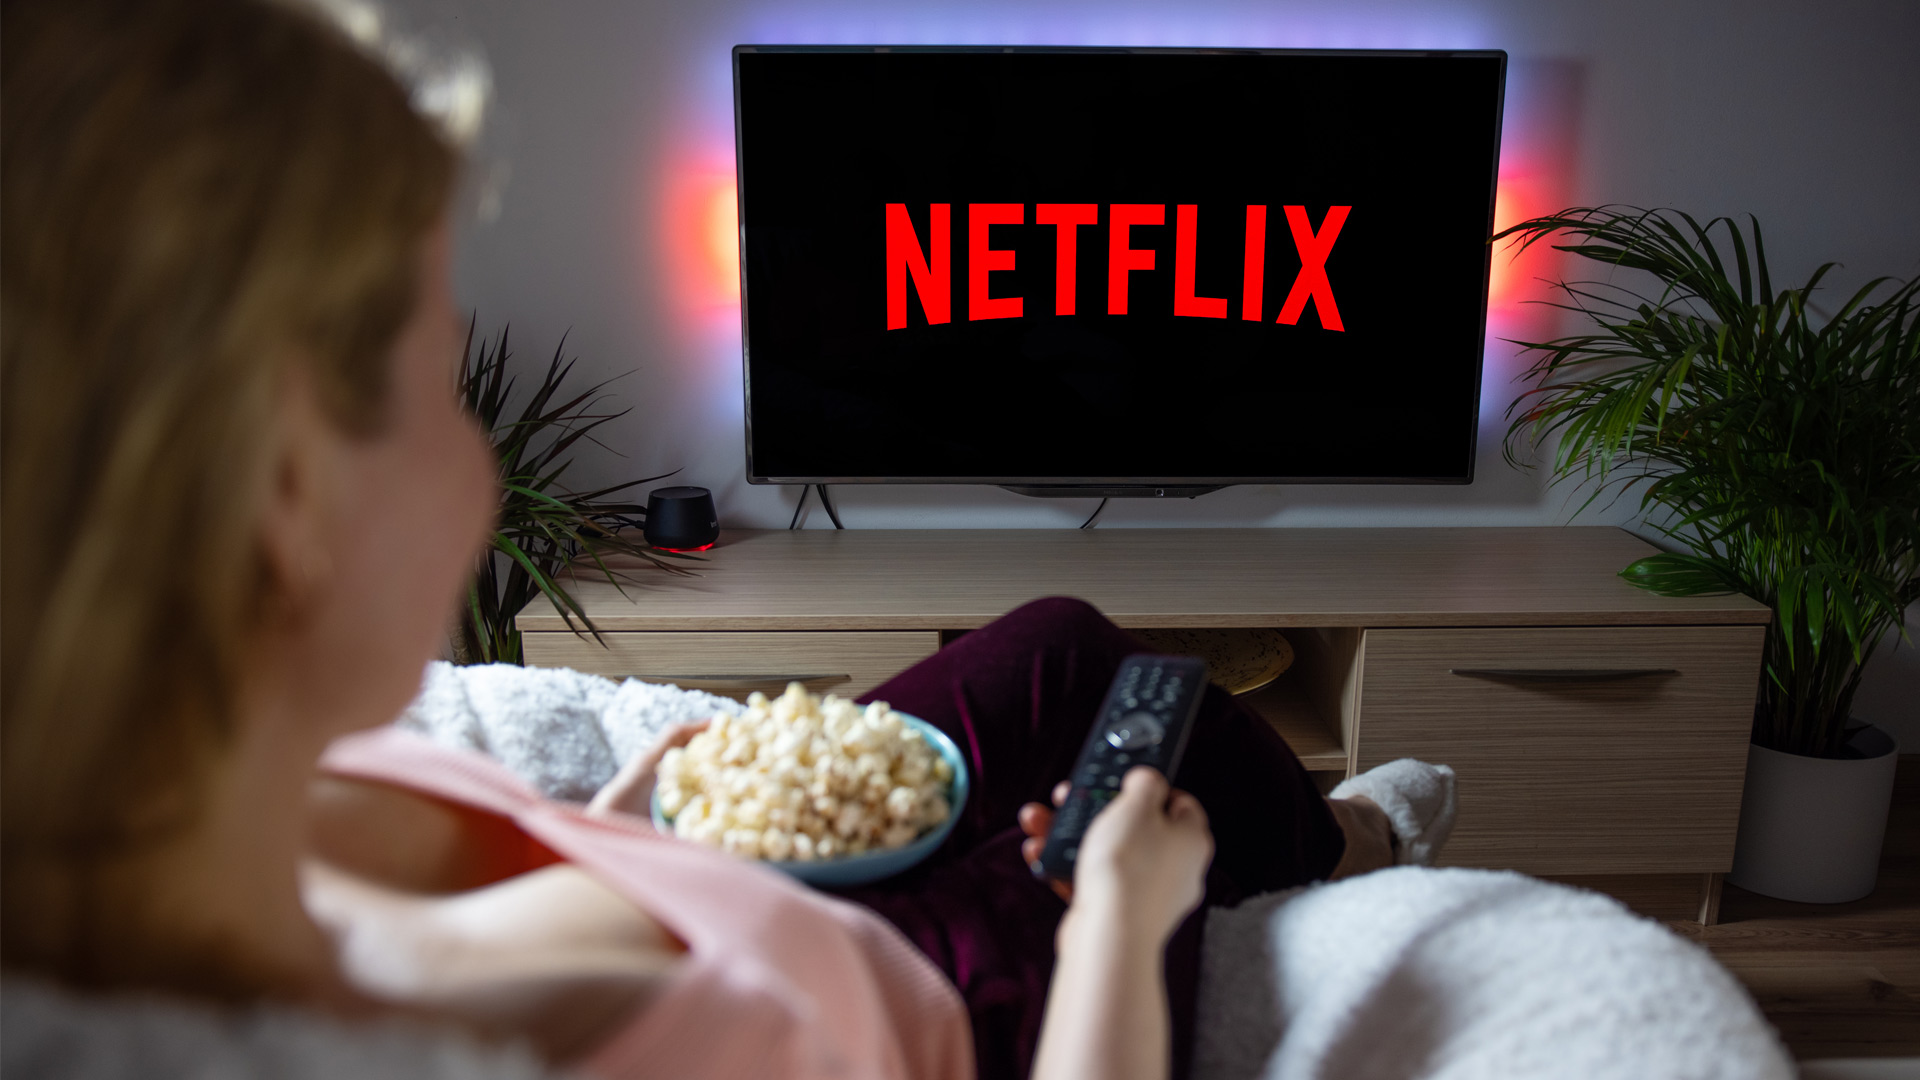 netflix extends its password crackdown plan to sky users, and it's very confusing